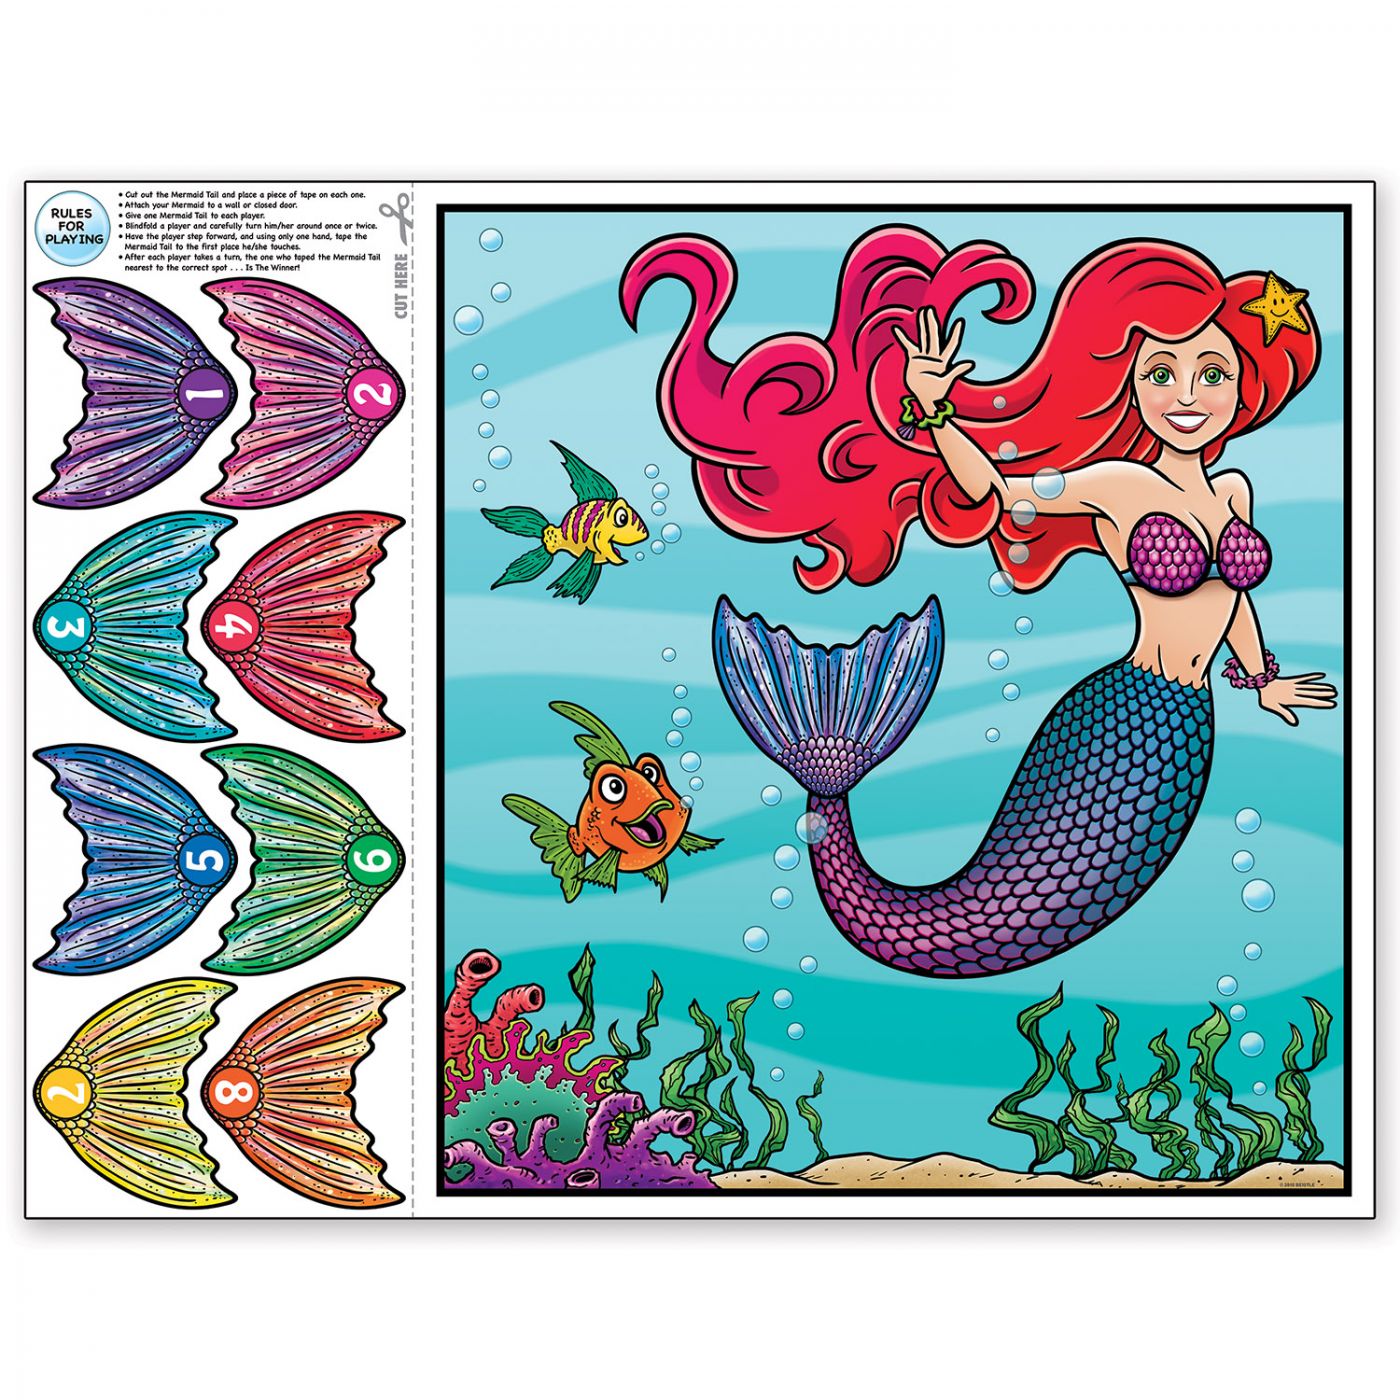 Pin The Tail On The Mermaid Game (24) image